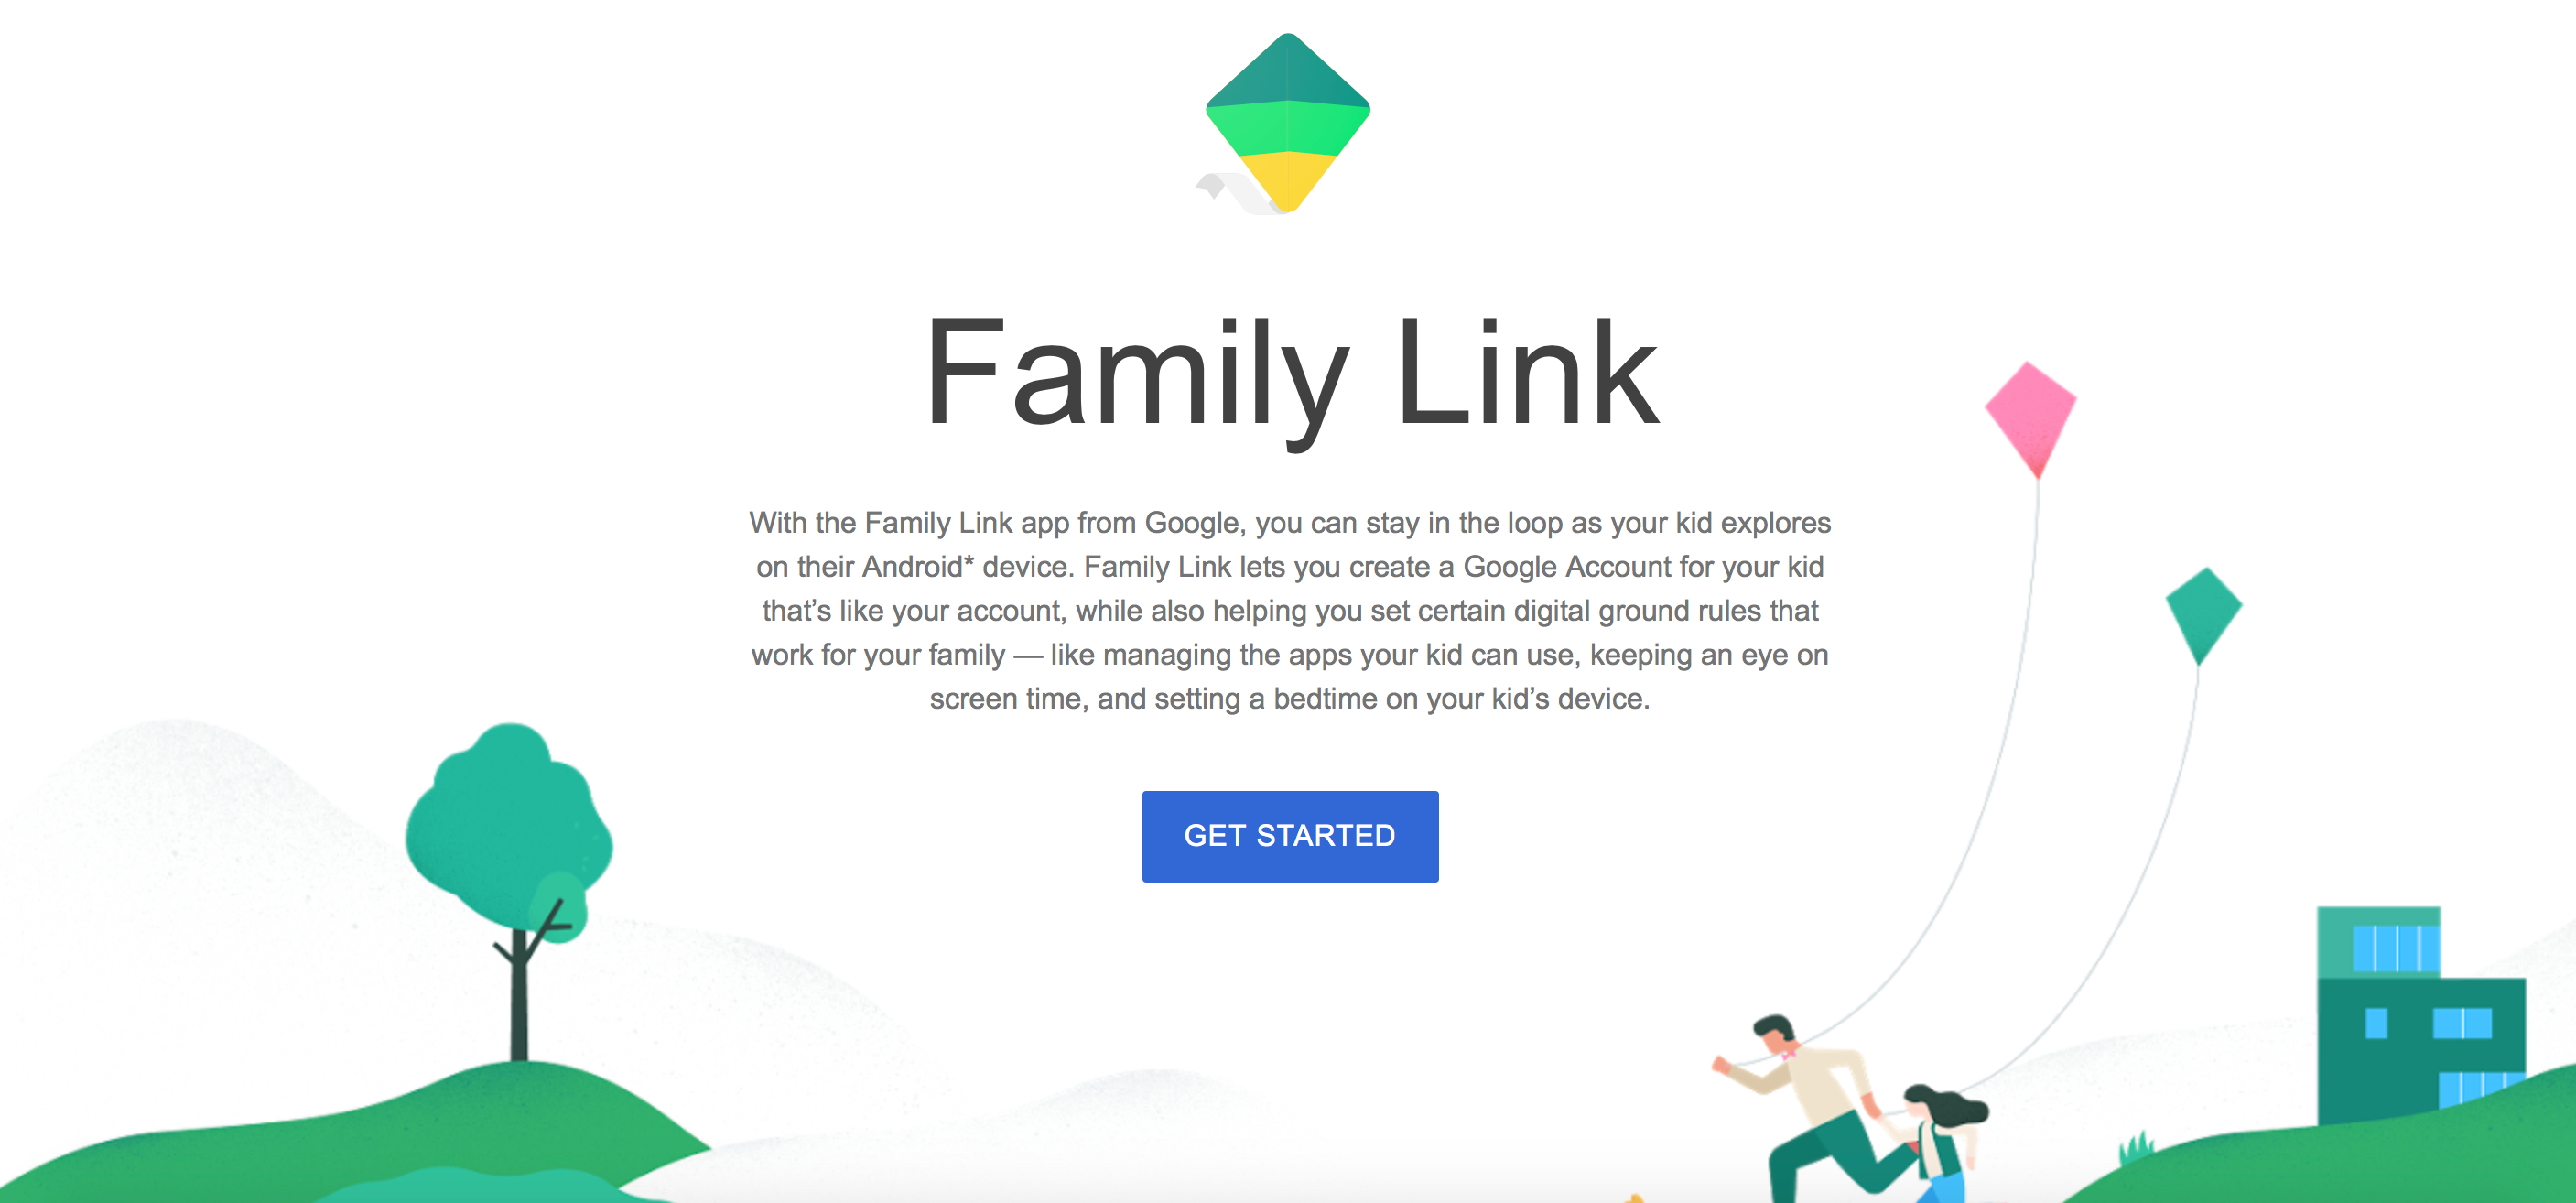 Family Link is a new Android app that helps parents manage their kids&#039; usage of smartphones and tablets